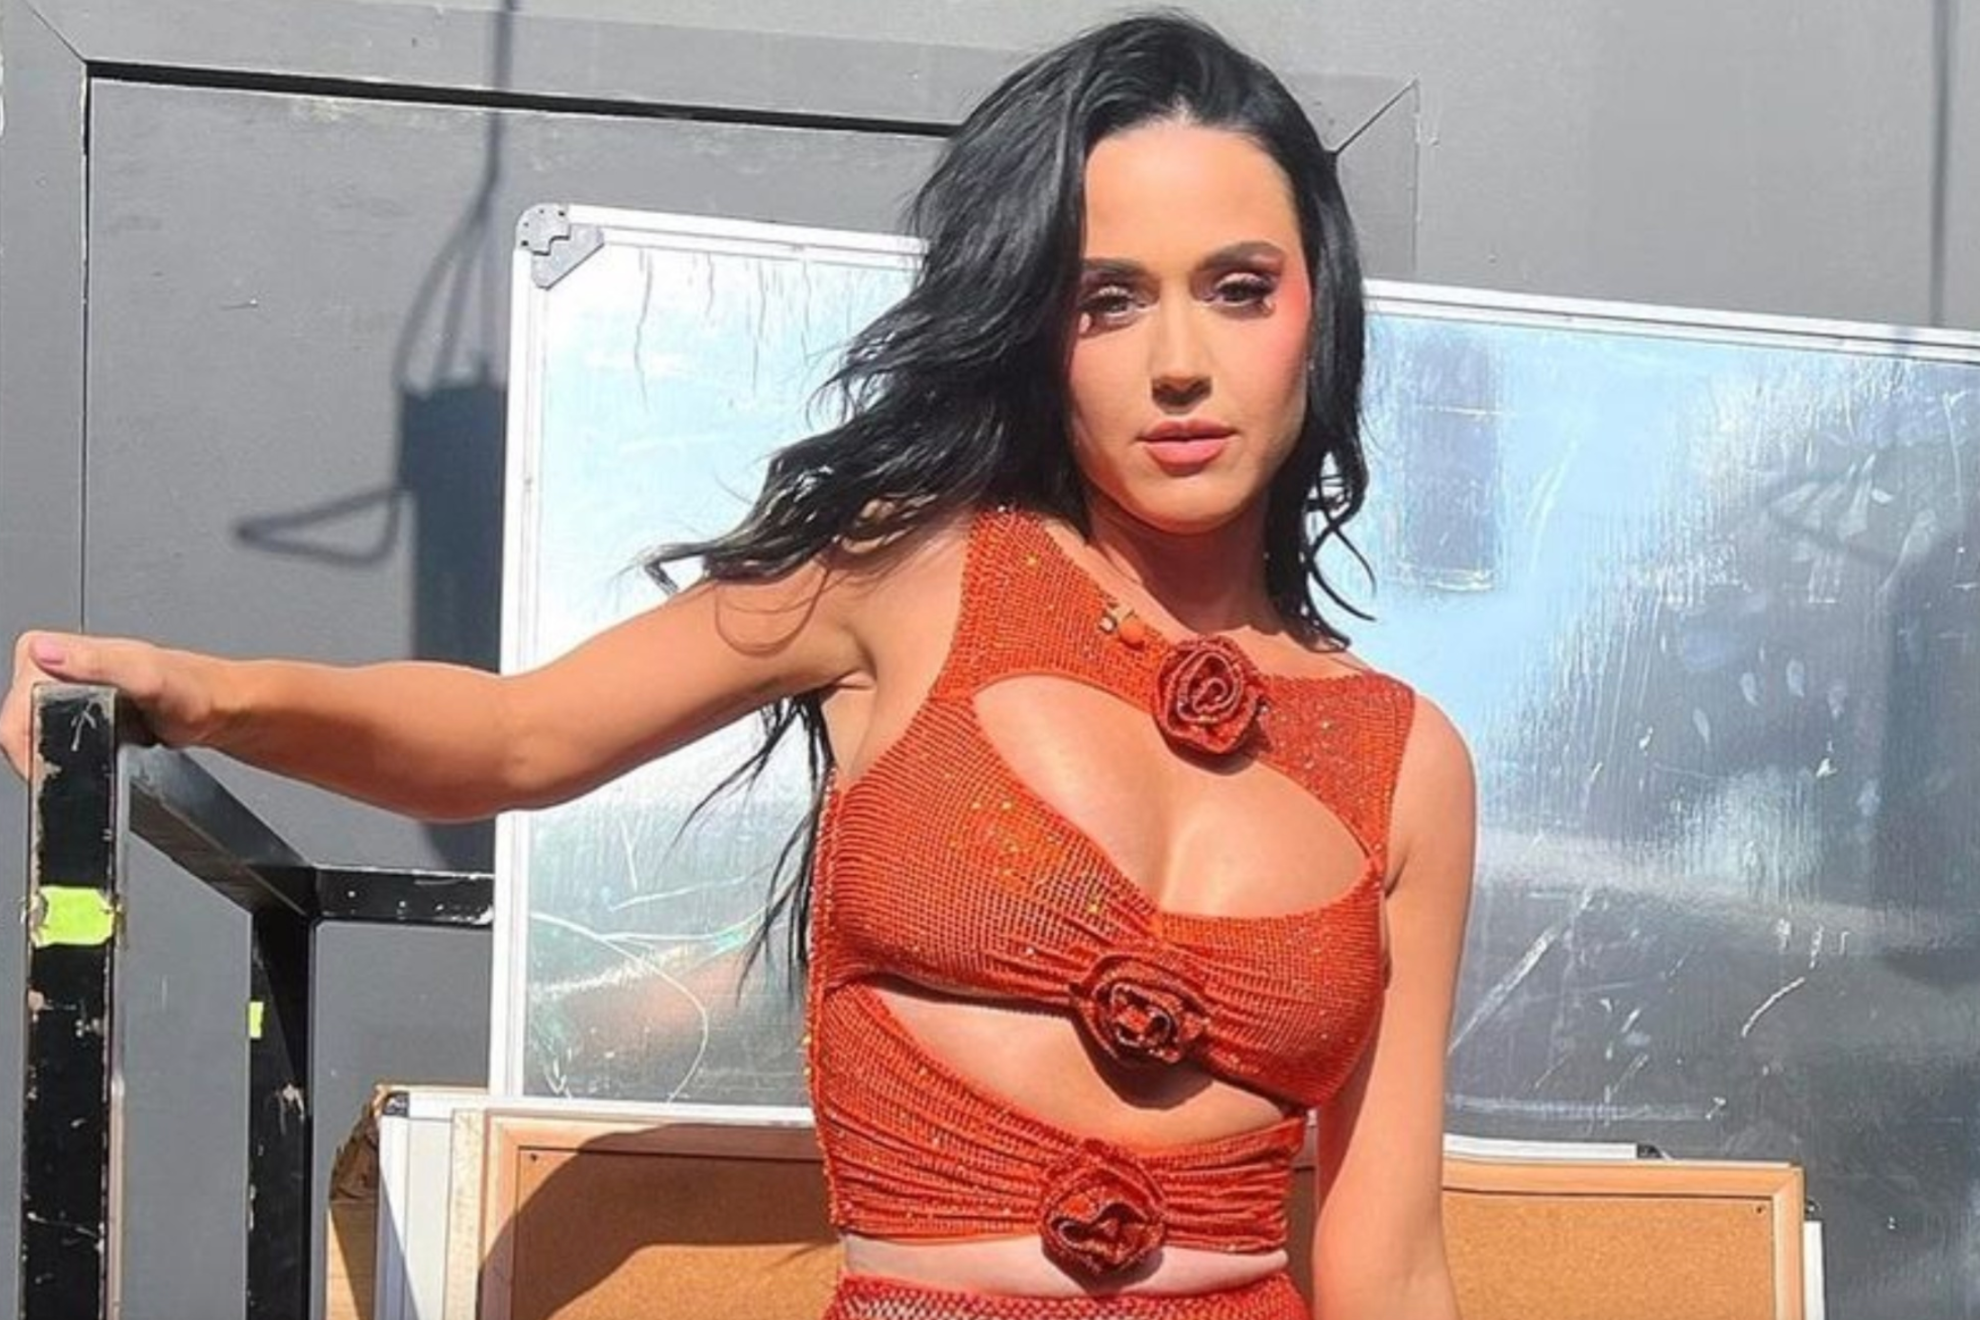 Katy Perry announces she is leaving American Idol after seven seasons: What are the reasons?